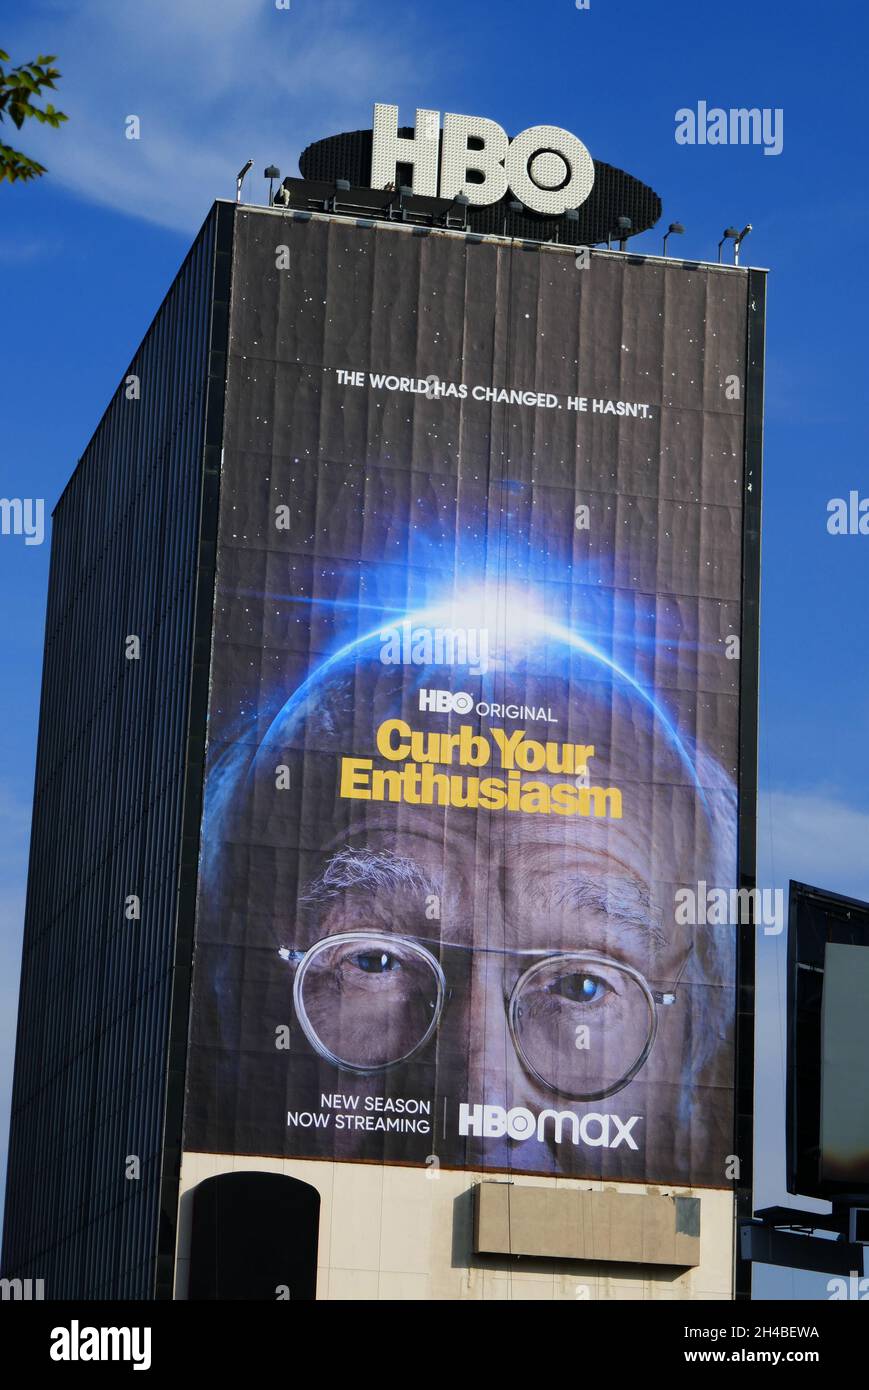 Los Angeles, California, USA 31st October 2021 A general view of atmosphere of Curb Your Enthusiasm billboard on October 31, 2021 in Los Angeles, California, USA. Photo by Barry King/Alamy Stock Photo Stock Photo